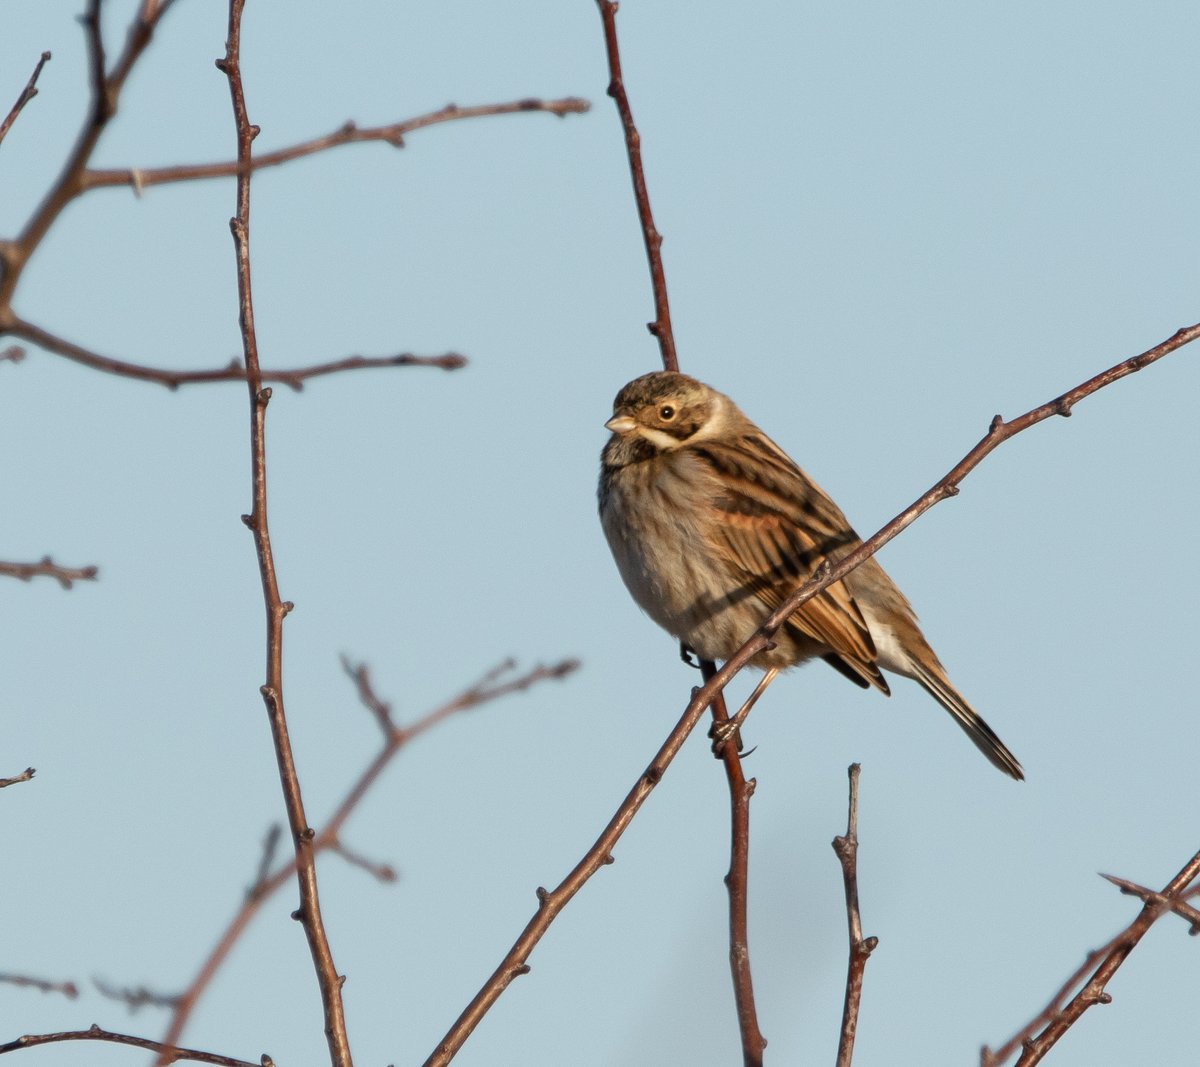 Reed Bunting at Saltholme the other day
#birdphotography #wildlife #ukwildlife #wildlifephotography #canon7DMK2 #birdwatching #birds #NaturePhotography